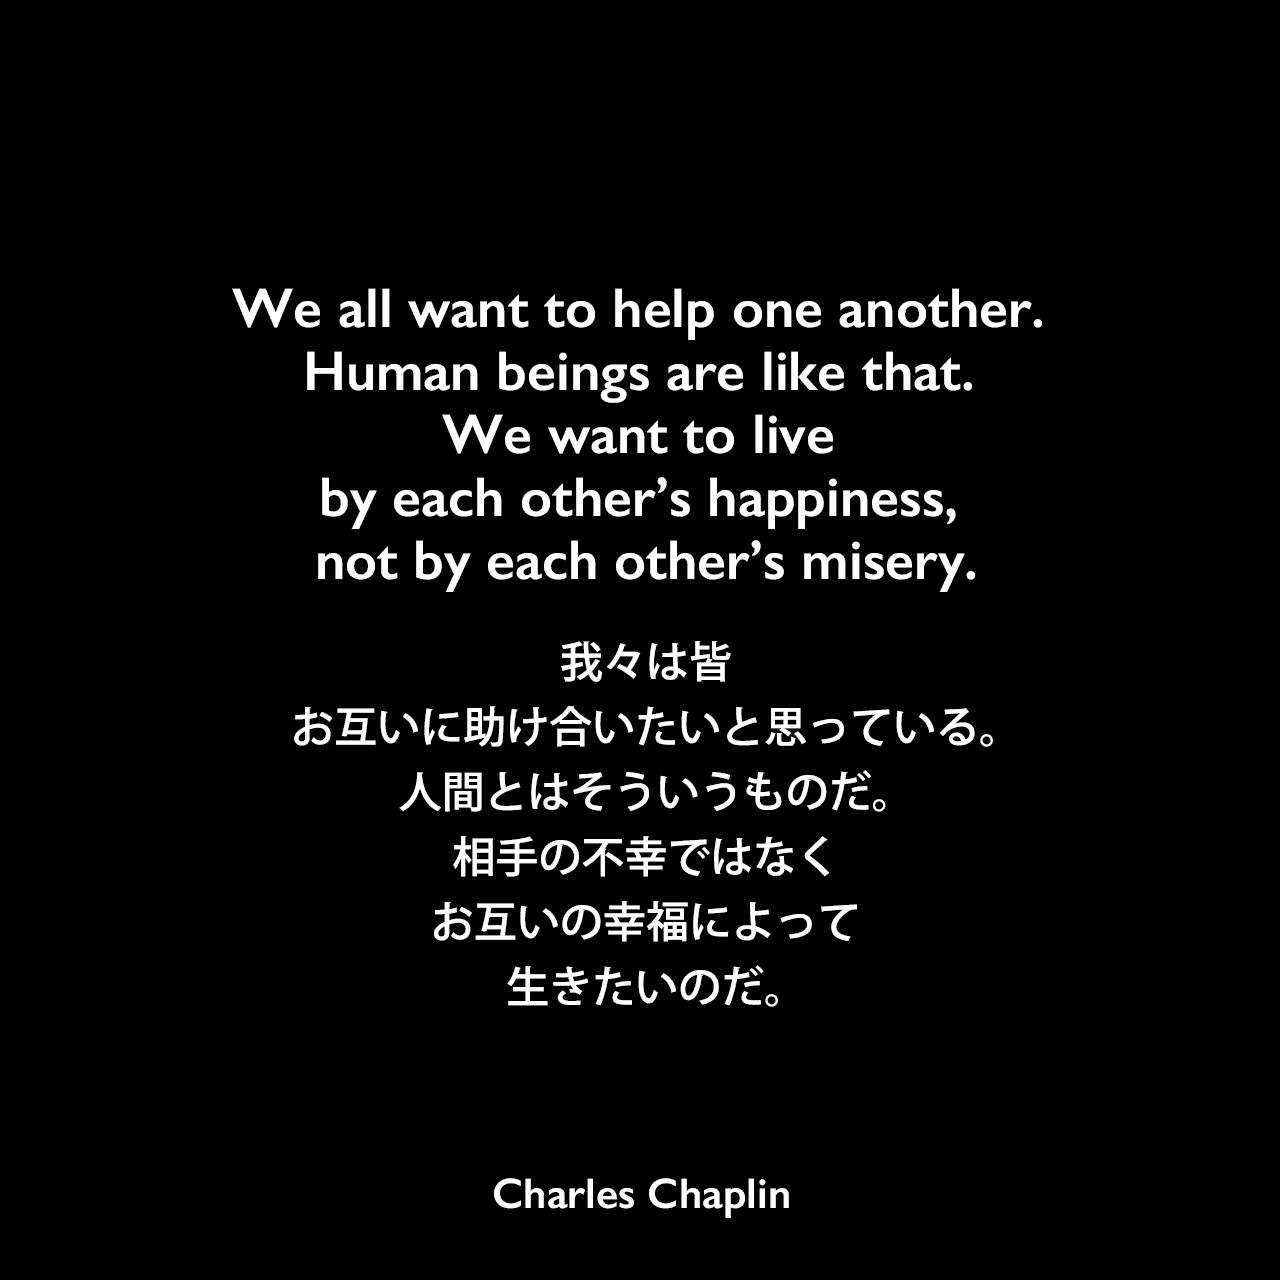 We all want to help one another. Human beings are like that. We want to live by each other’s happiness, not by each other’s misery.我々は皆、お互いに助け合いたいと思っている。人間とはそういうものだ。相手の不幸ではなく、お互いの幸福によって生きたいのだ。-映画「独裁者」のスピーチよりCharles Chaplin